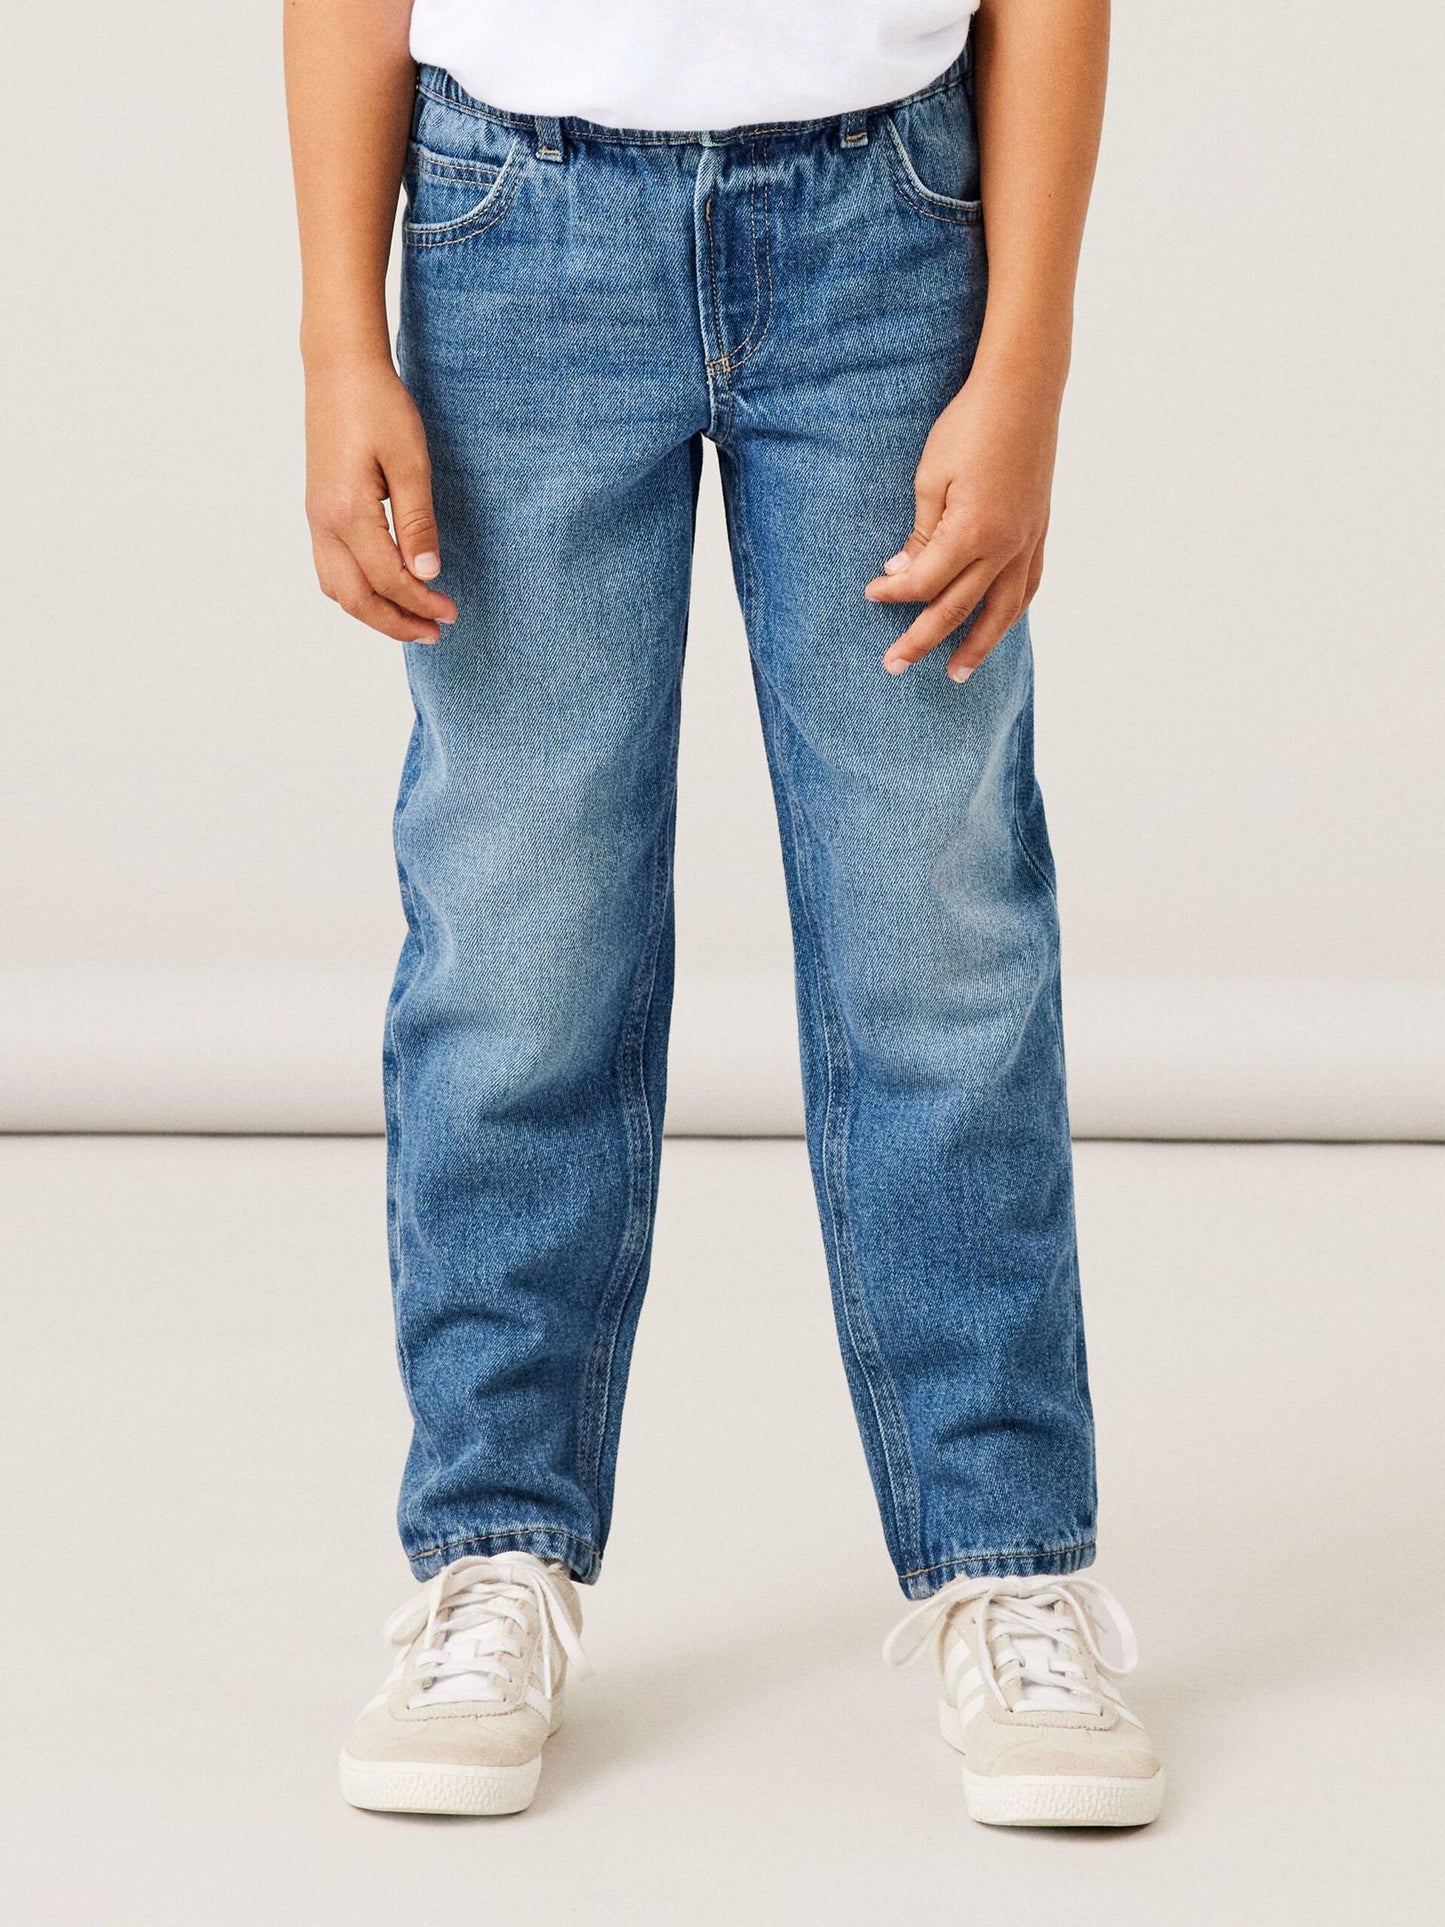 NAME IT KIDS TAPERED FIT JEANS